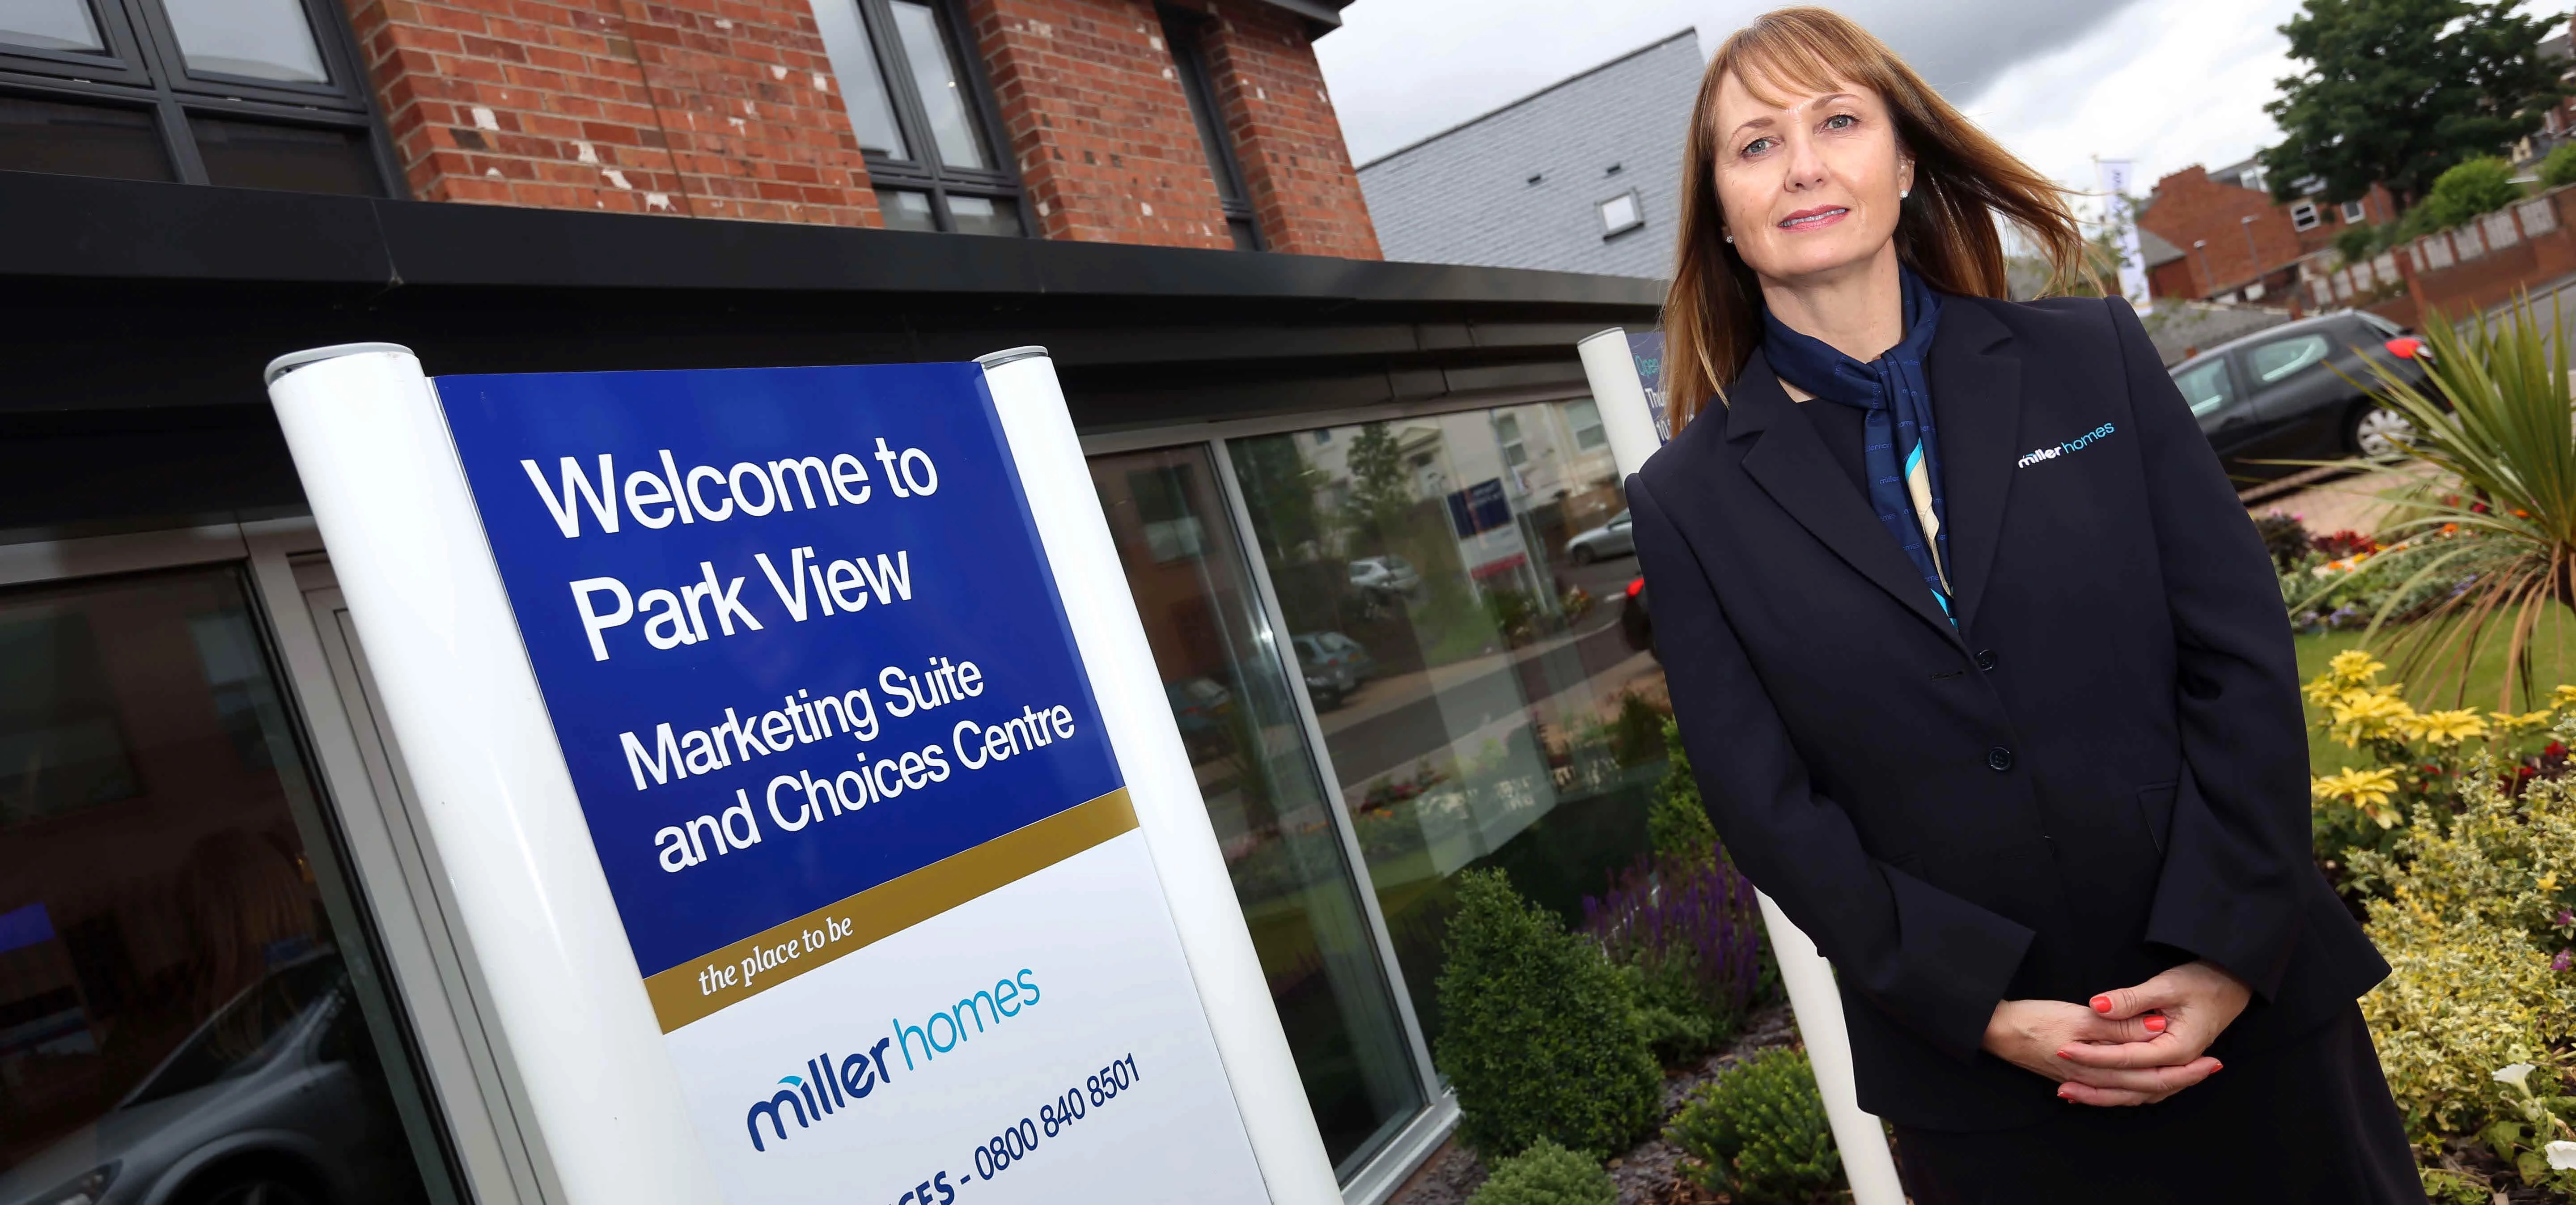 Miller Homes has unveiled its new Choices Centre at Park View